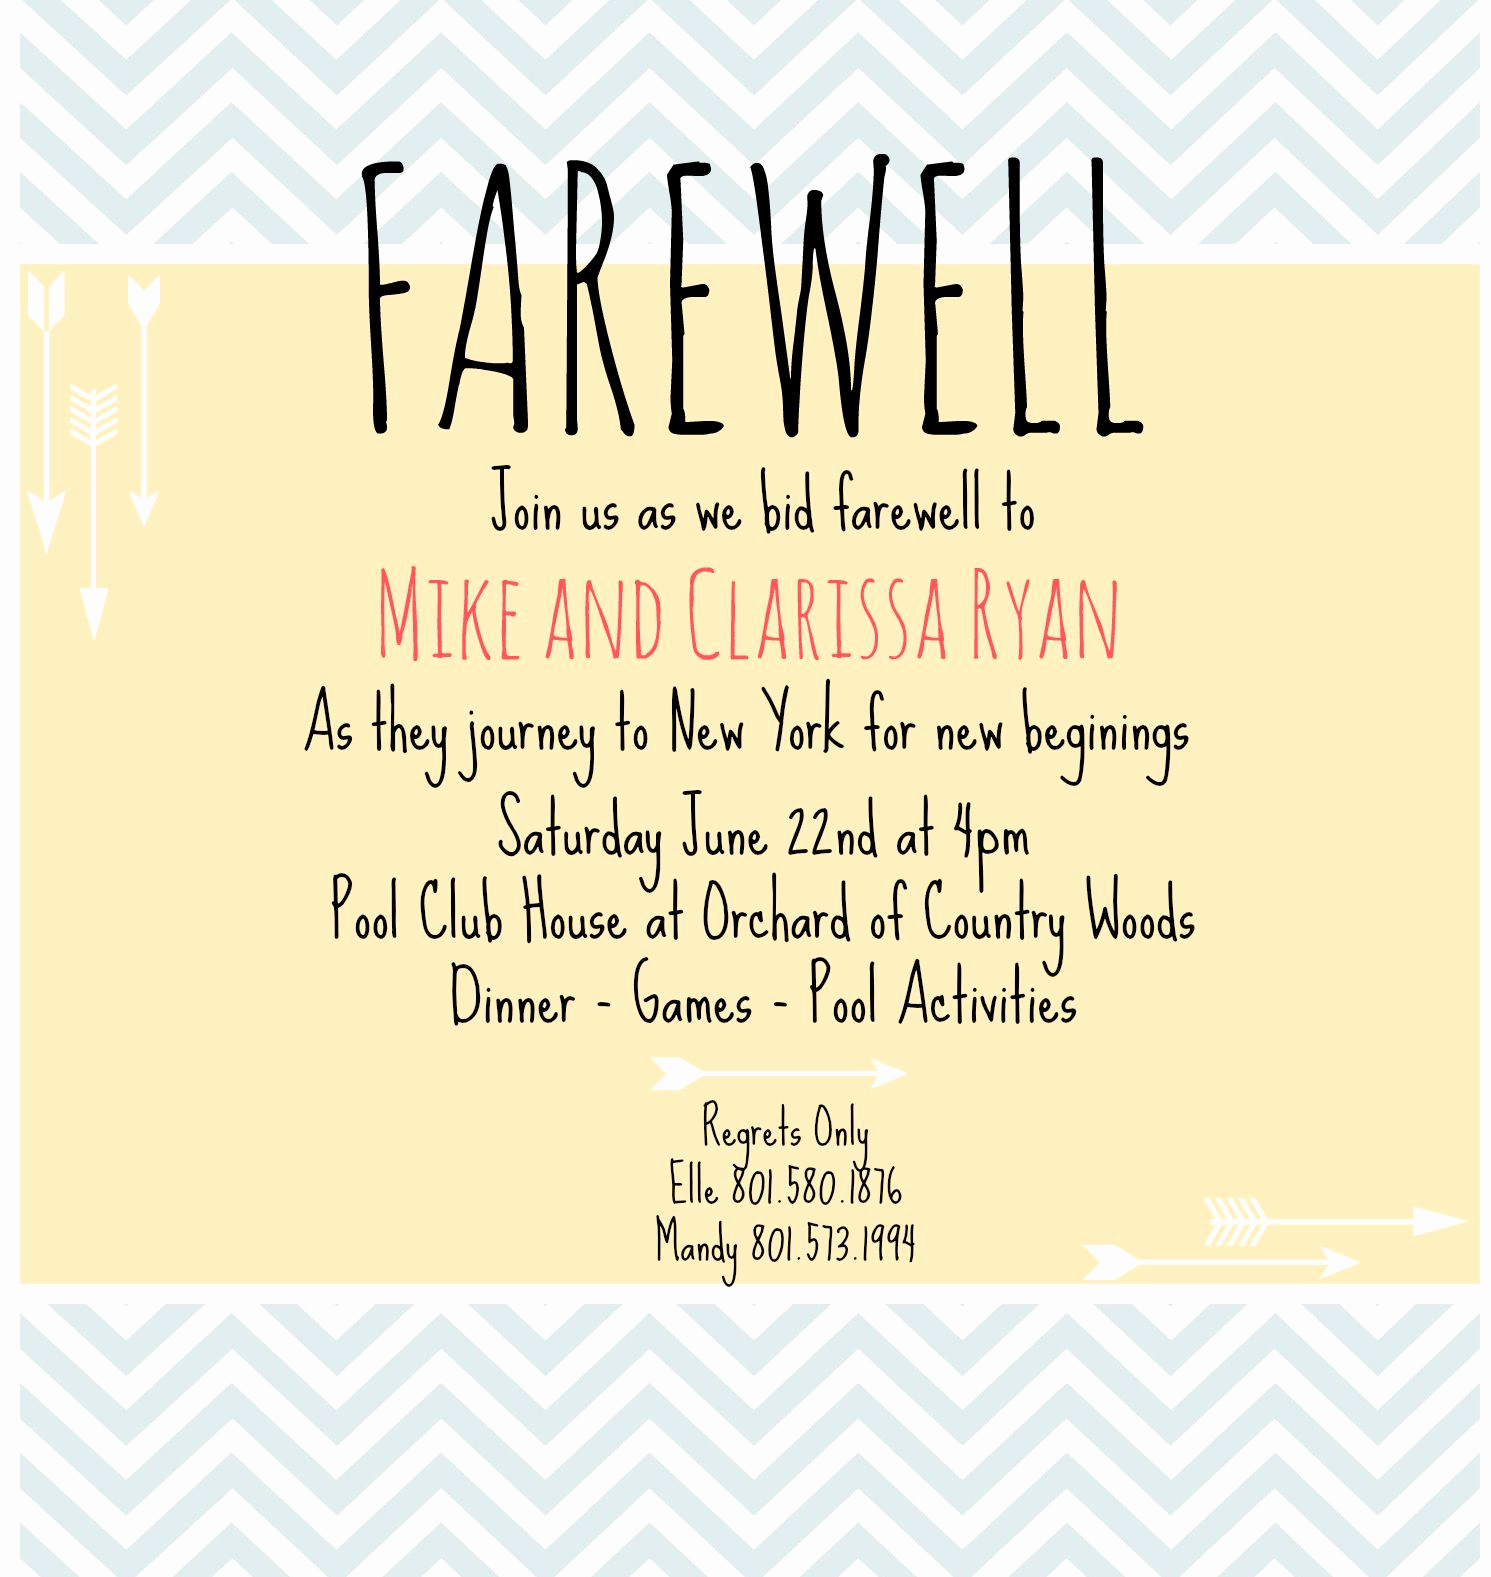 Farewell Invitation Template Free Awesome Farewell Invite Picmonkey Creations